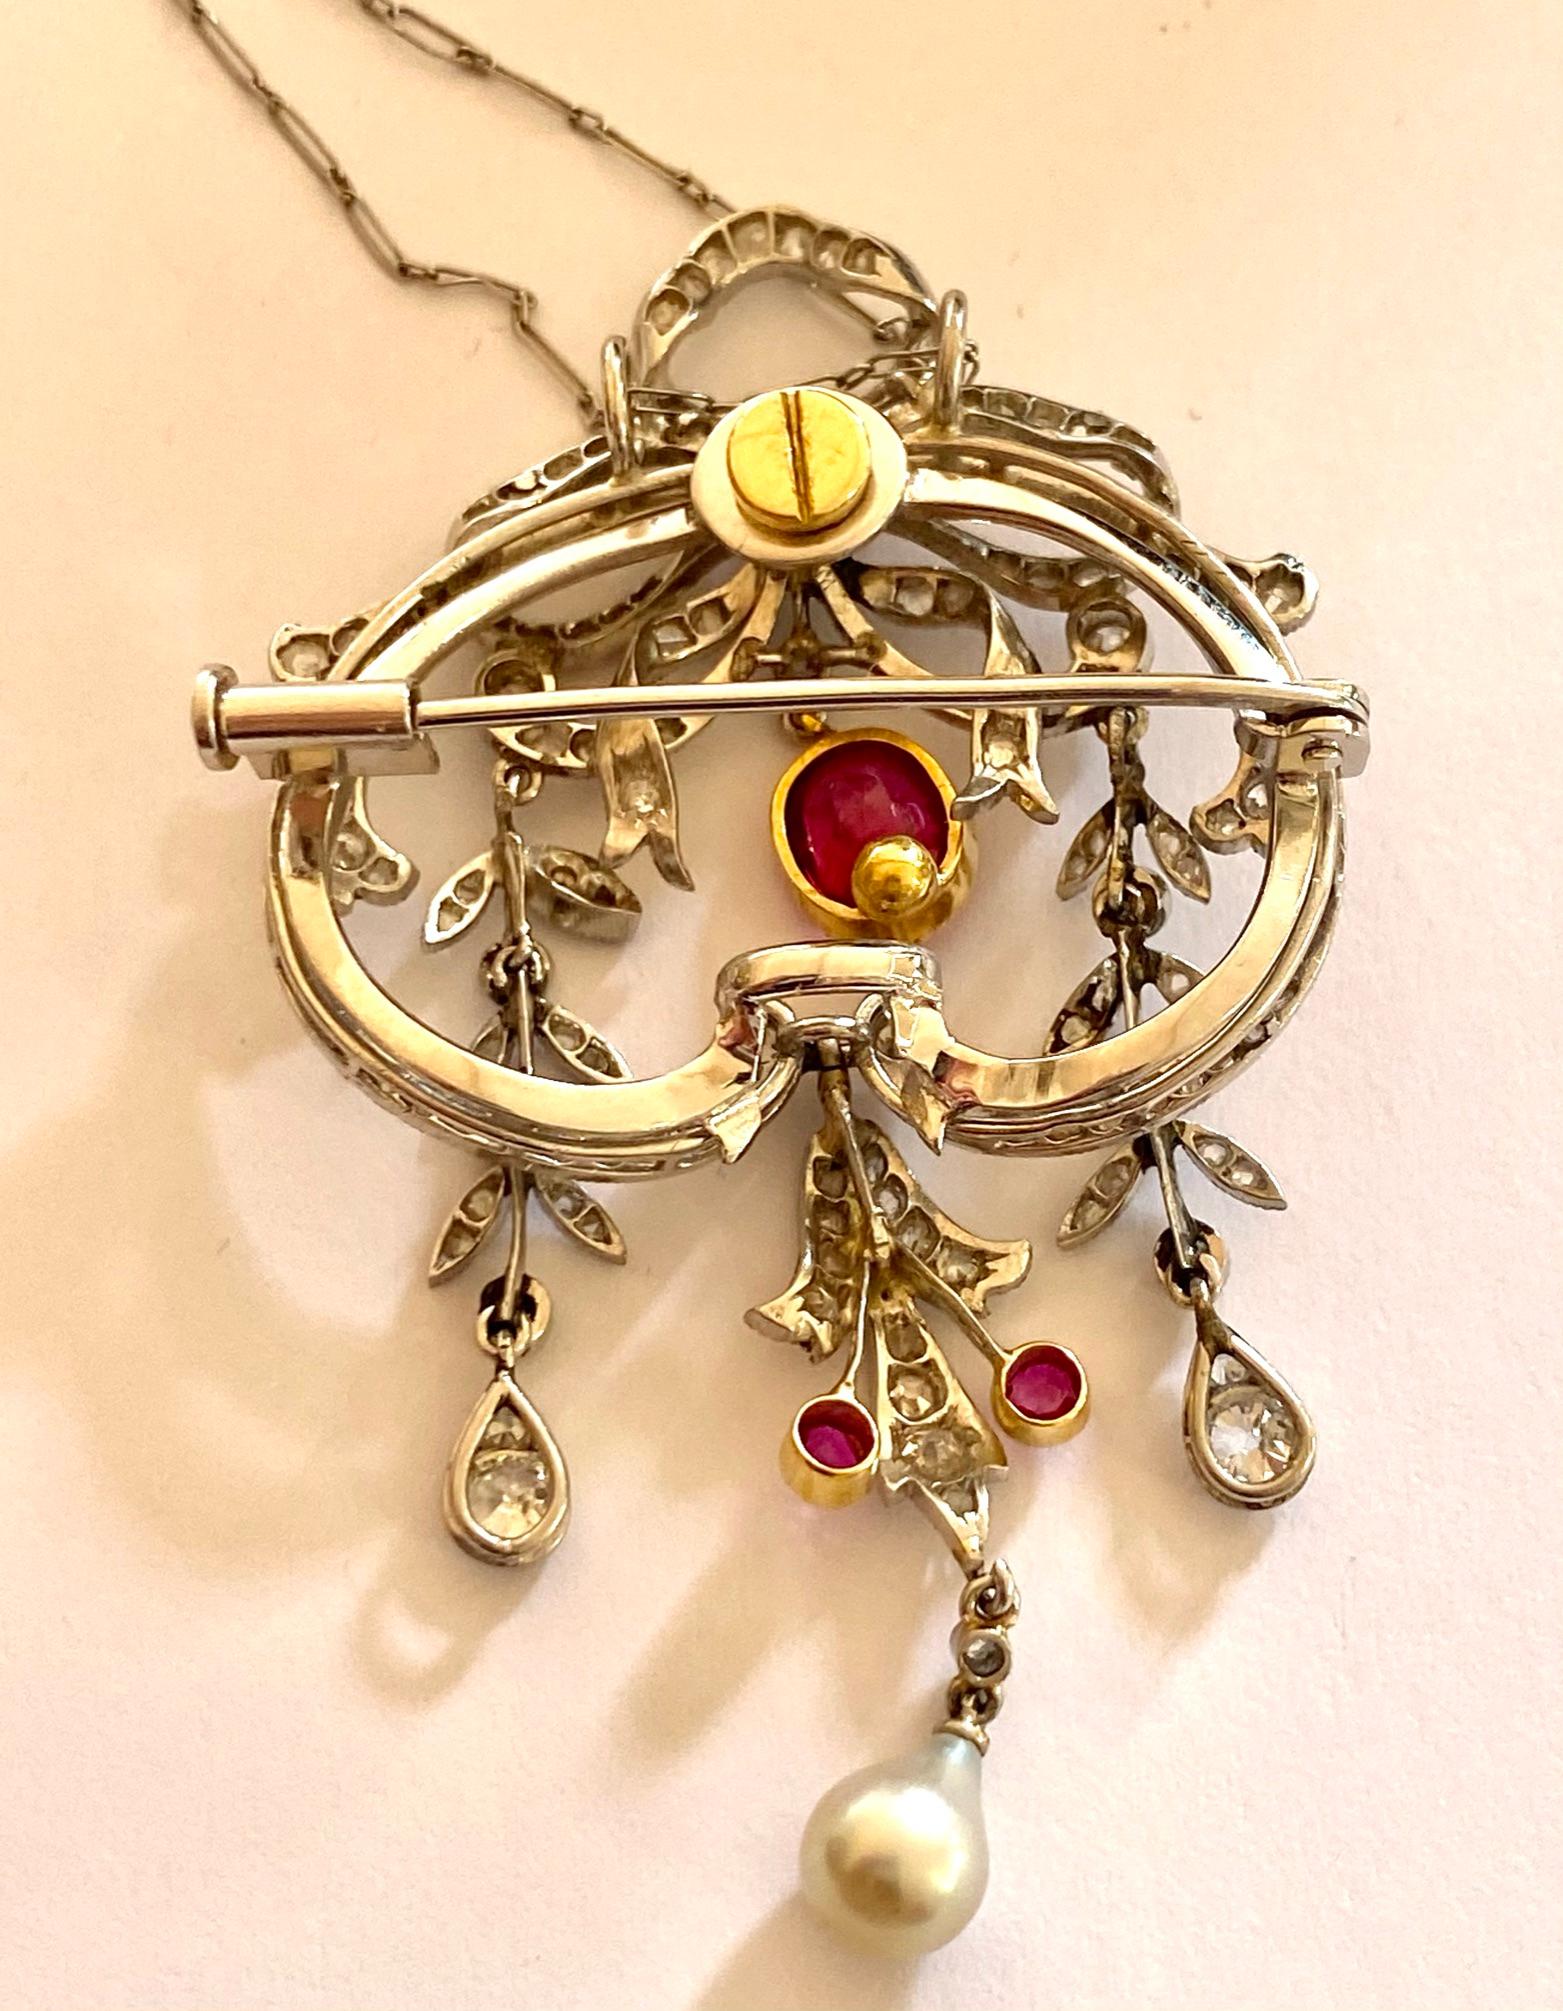 Edwardian Pendant with Chain / Brooch Platinum, Gold, Diamonds and Birma Ruby For Sale 2